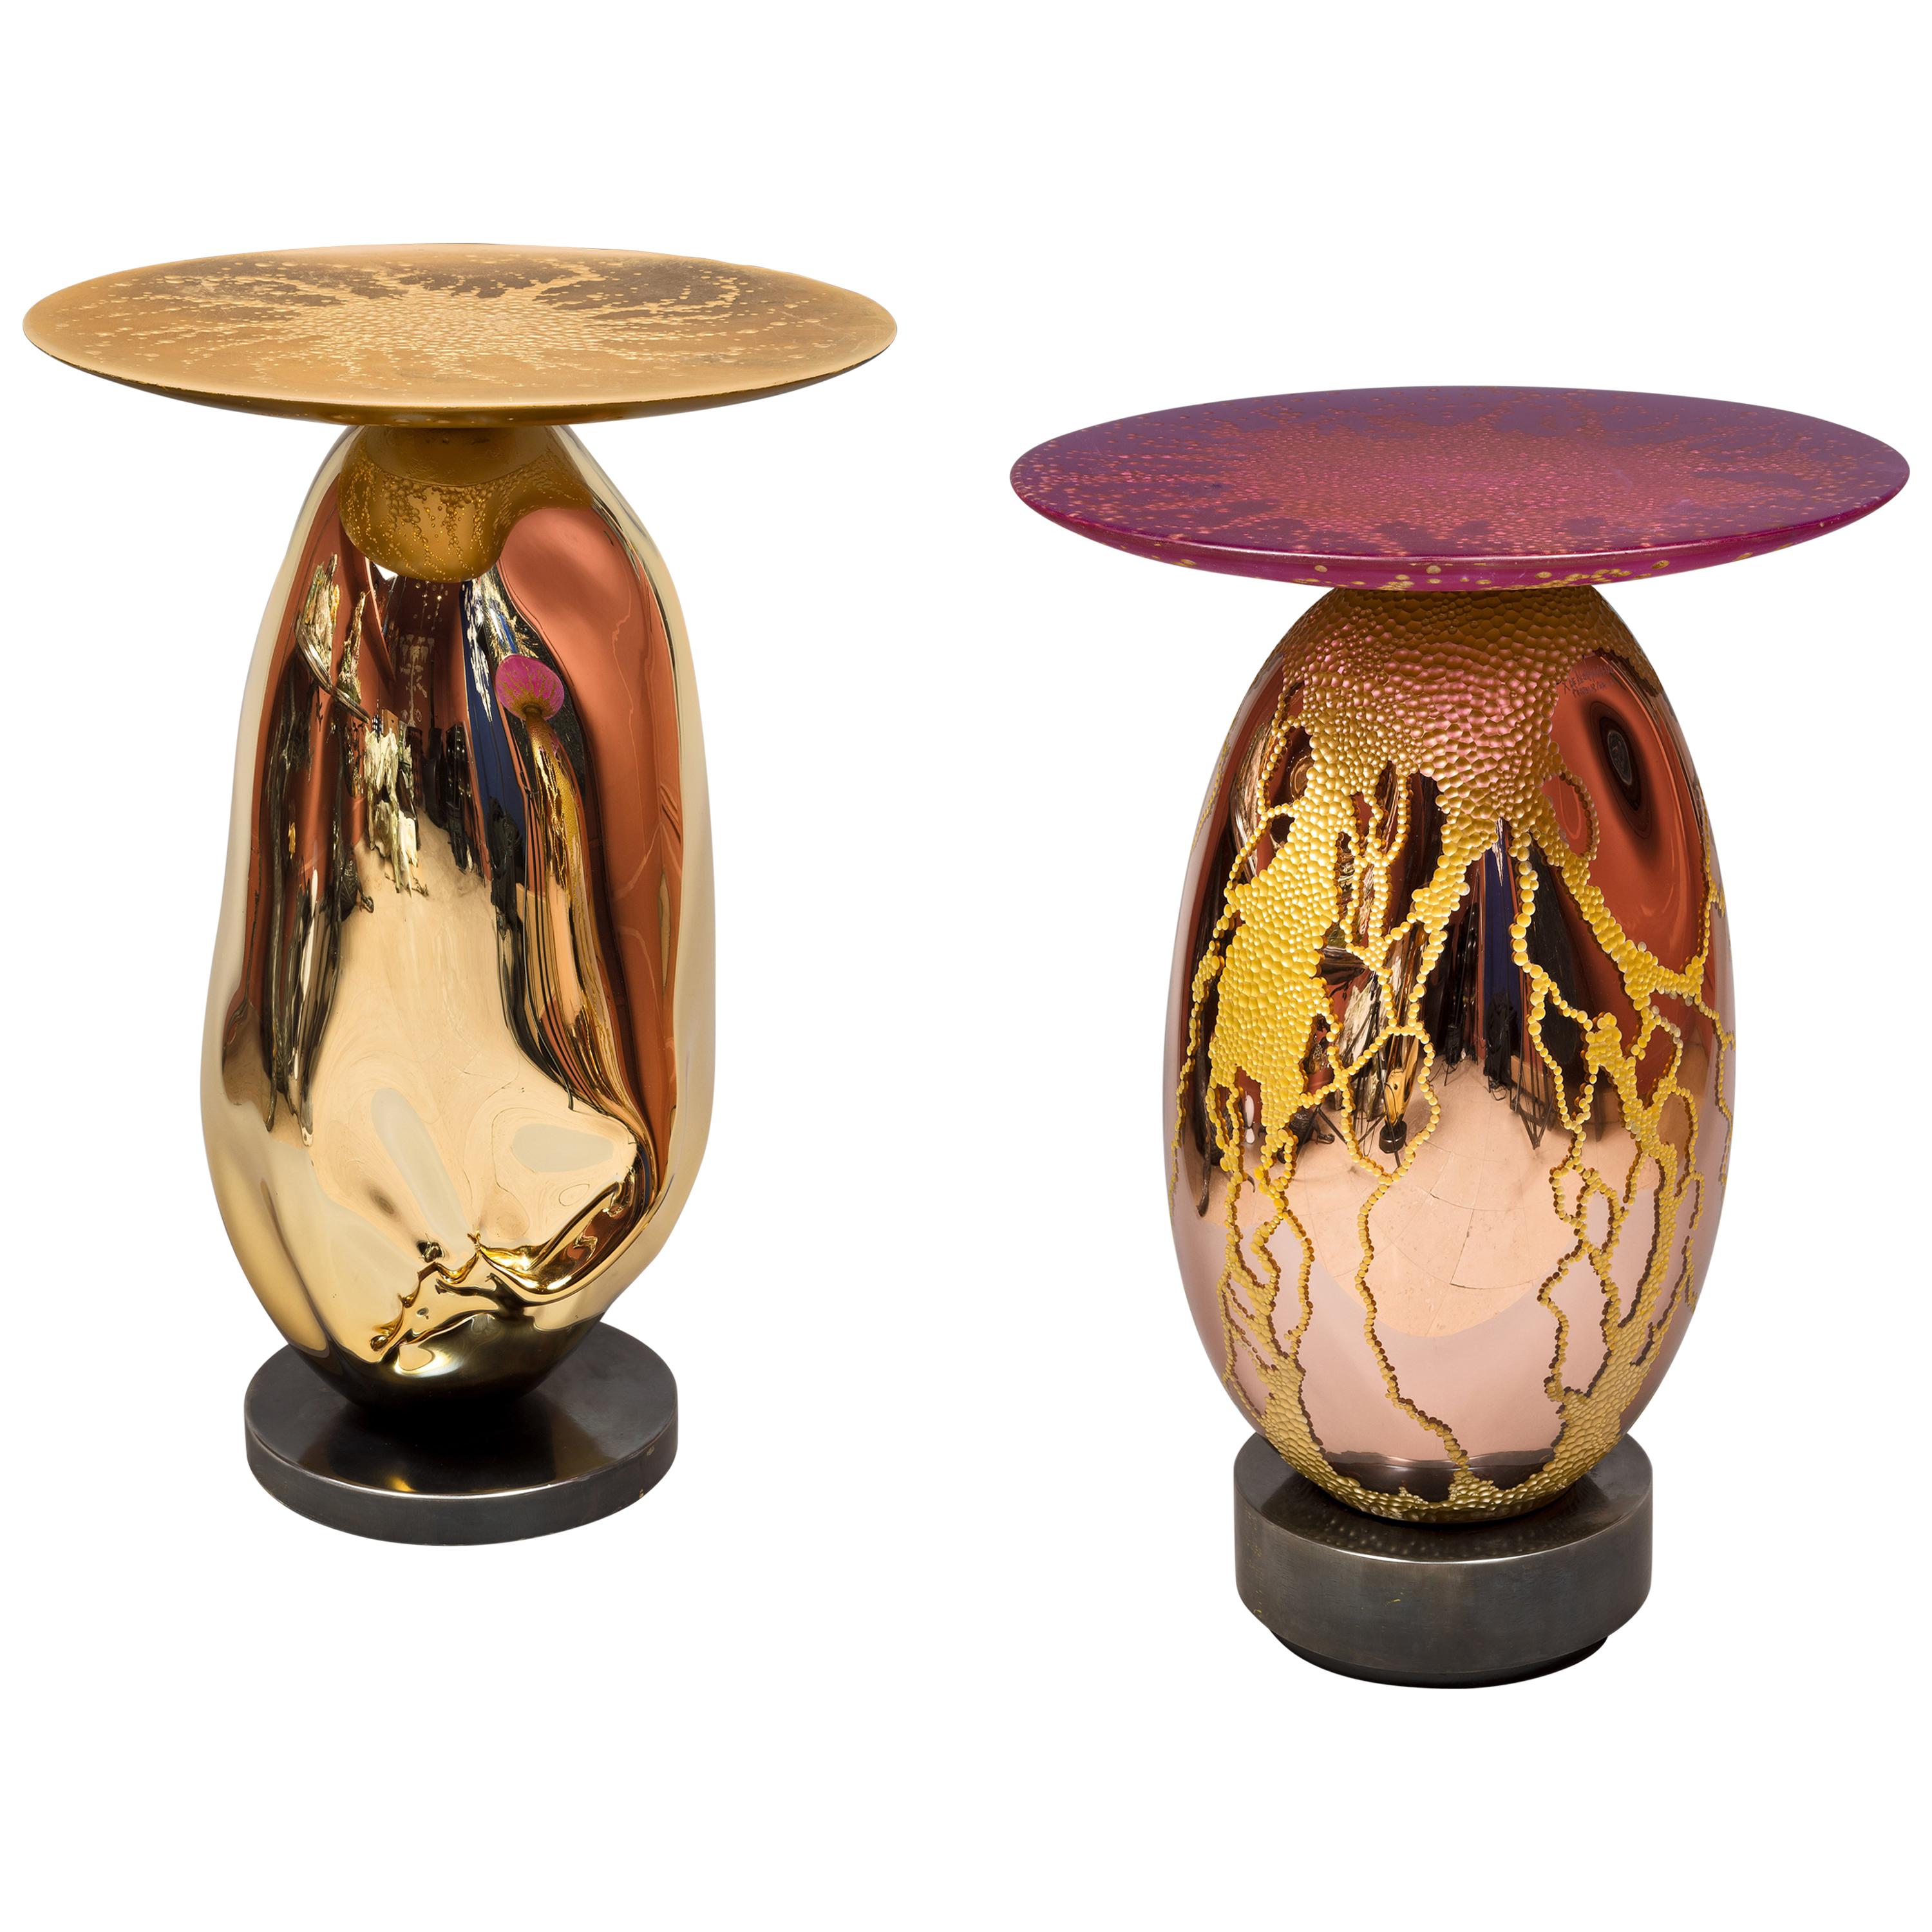 Xavier Le Normand 2018,  Pair of Unique Blow Glass Octopus Tables, Crystal Tops